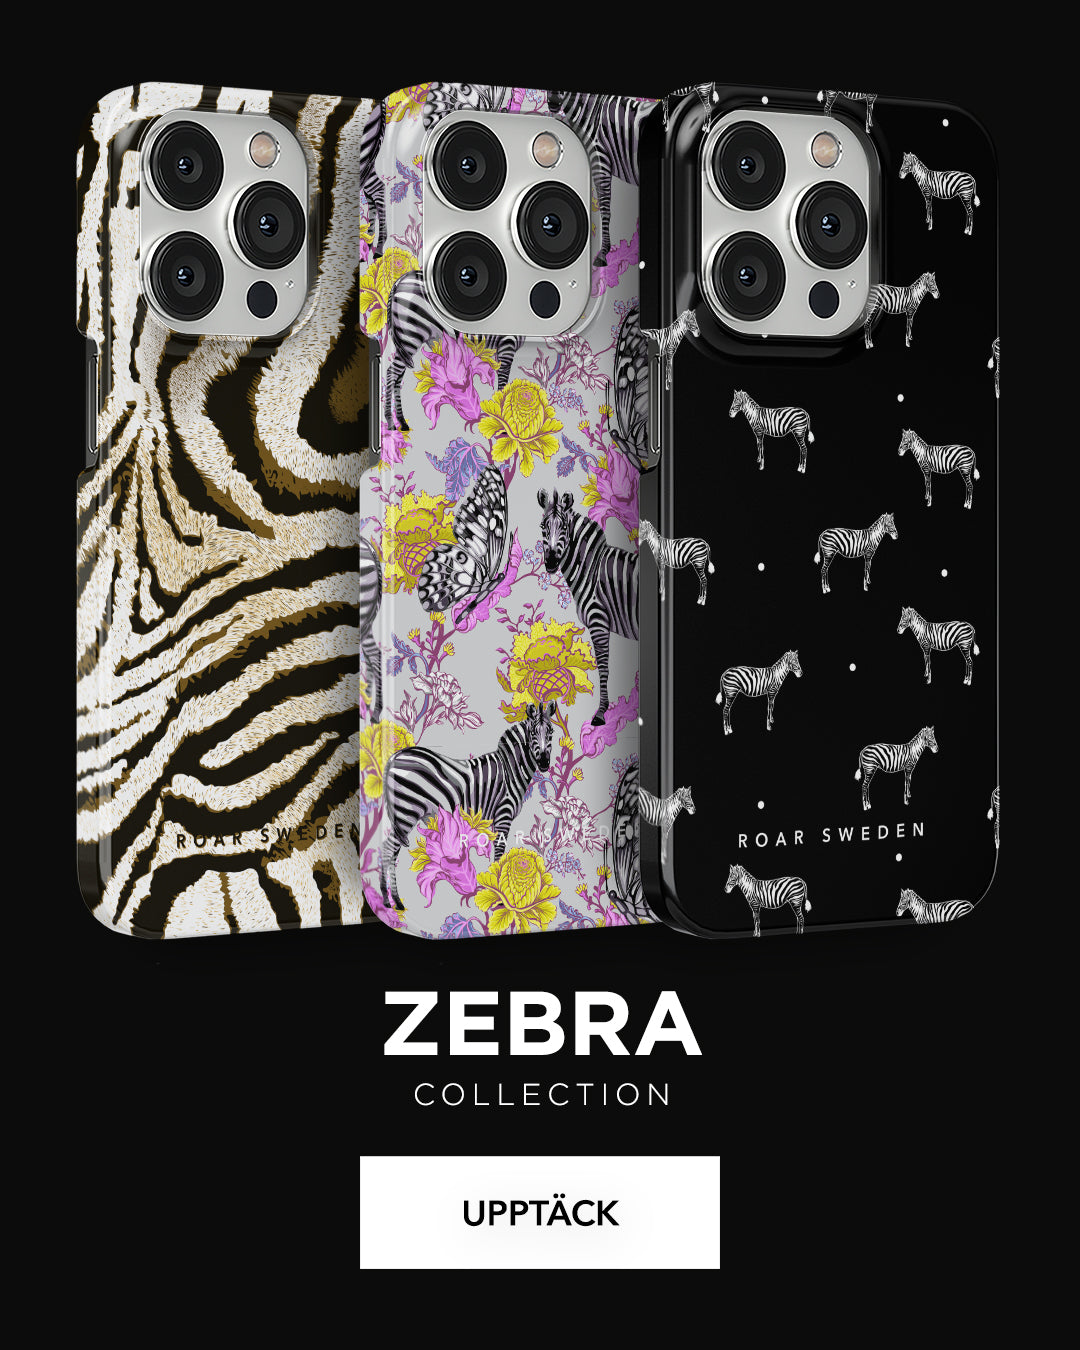 A collection of phone cases with various zebra-themed designs.